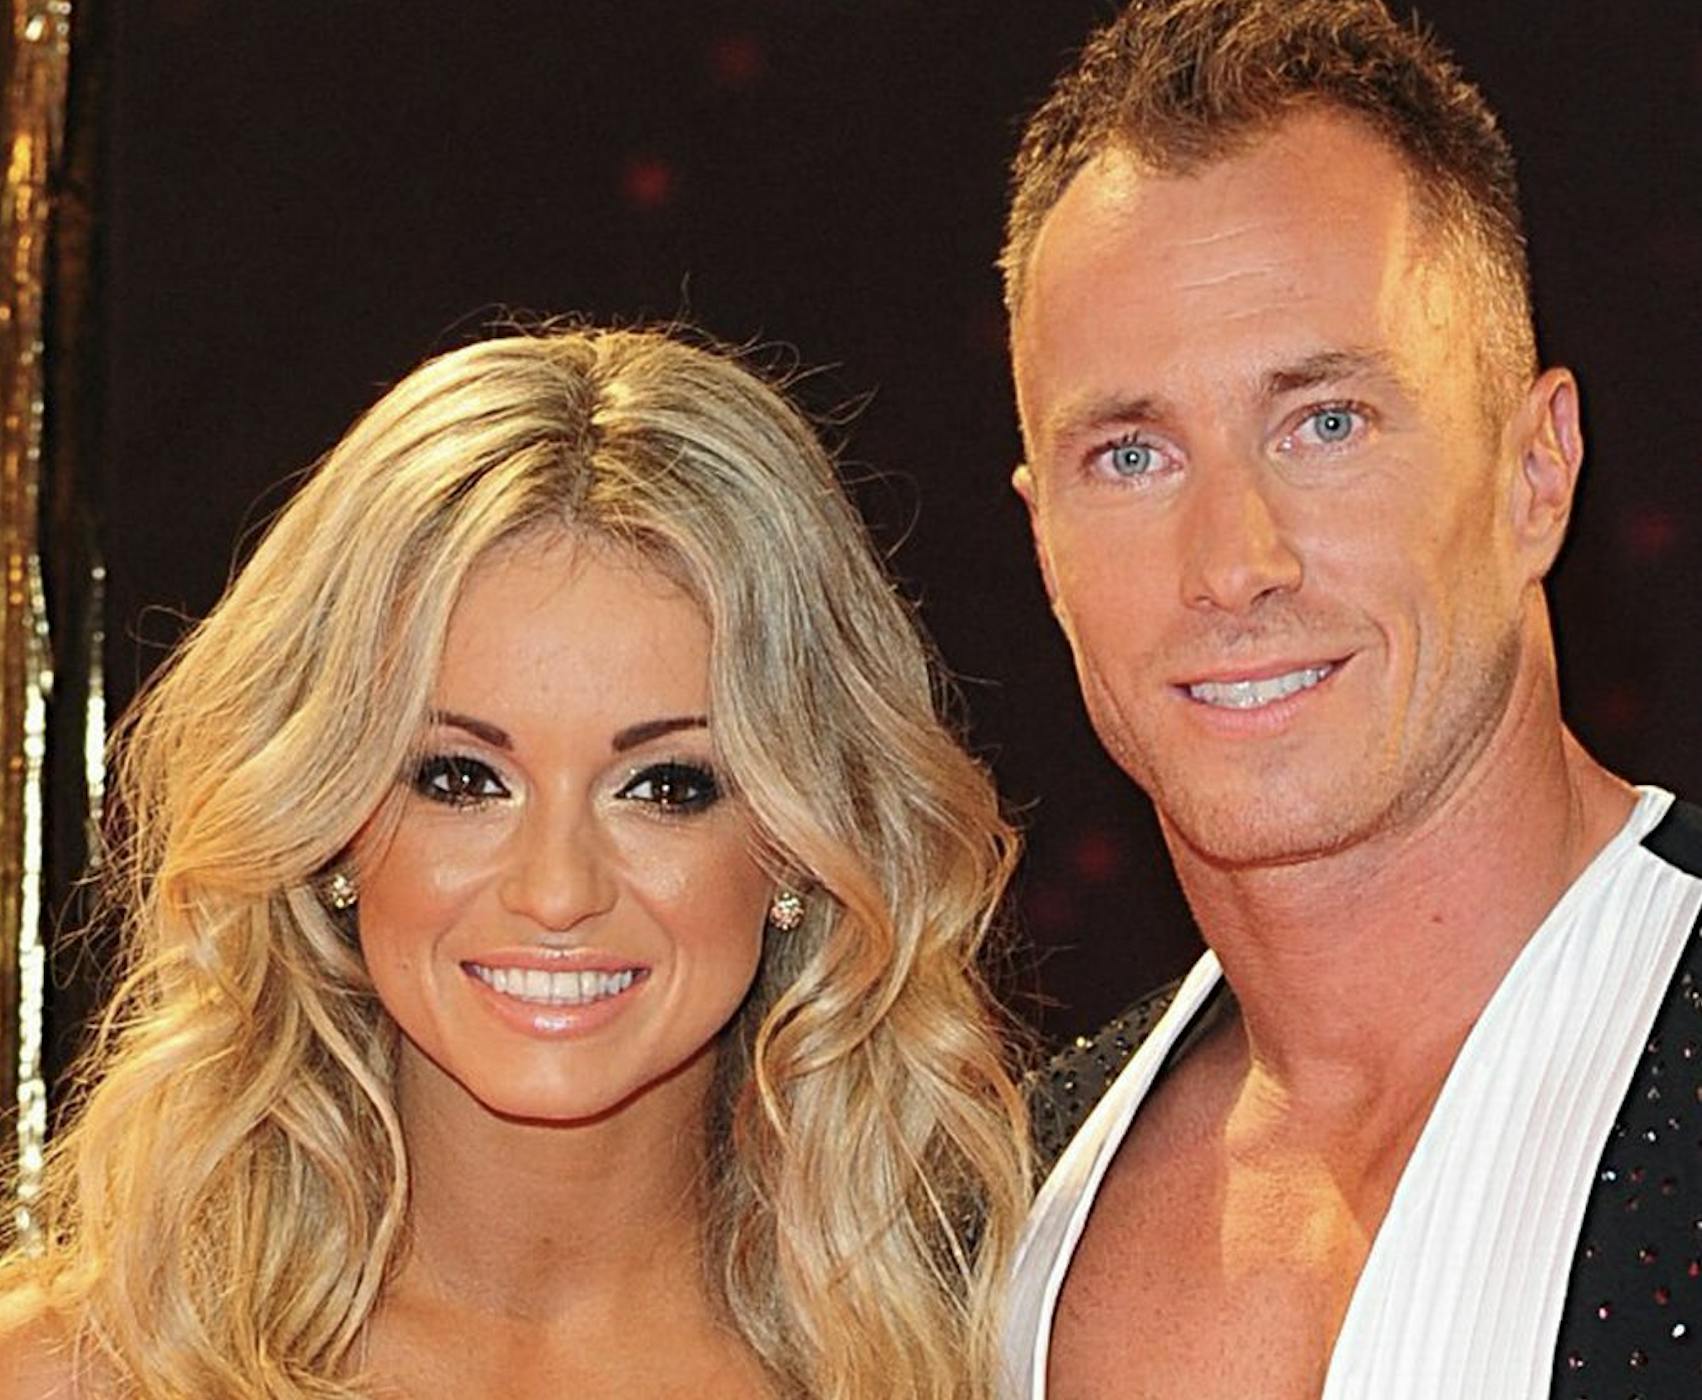 James and Ola Jordan - Strickly Come Dancing to fitness through dance